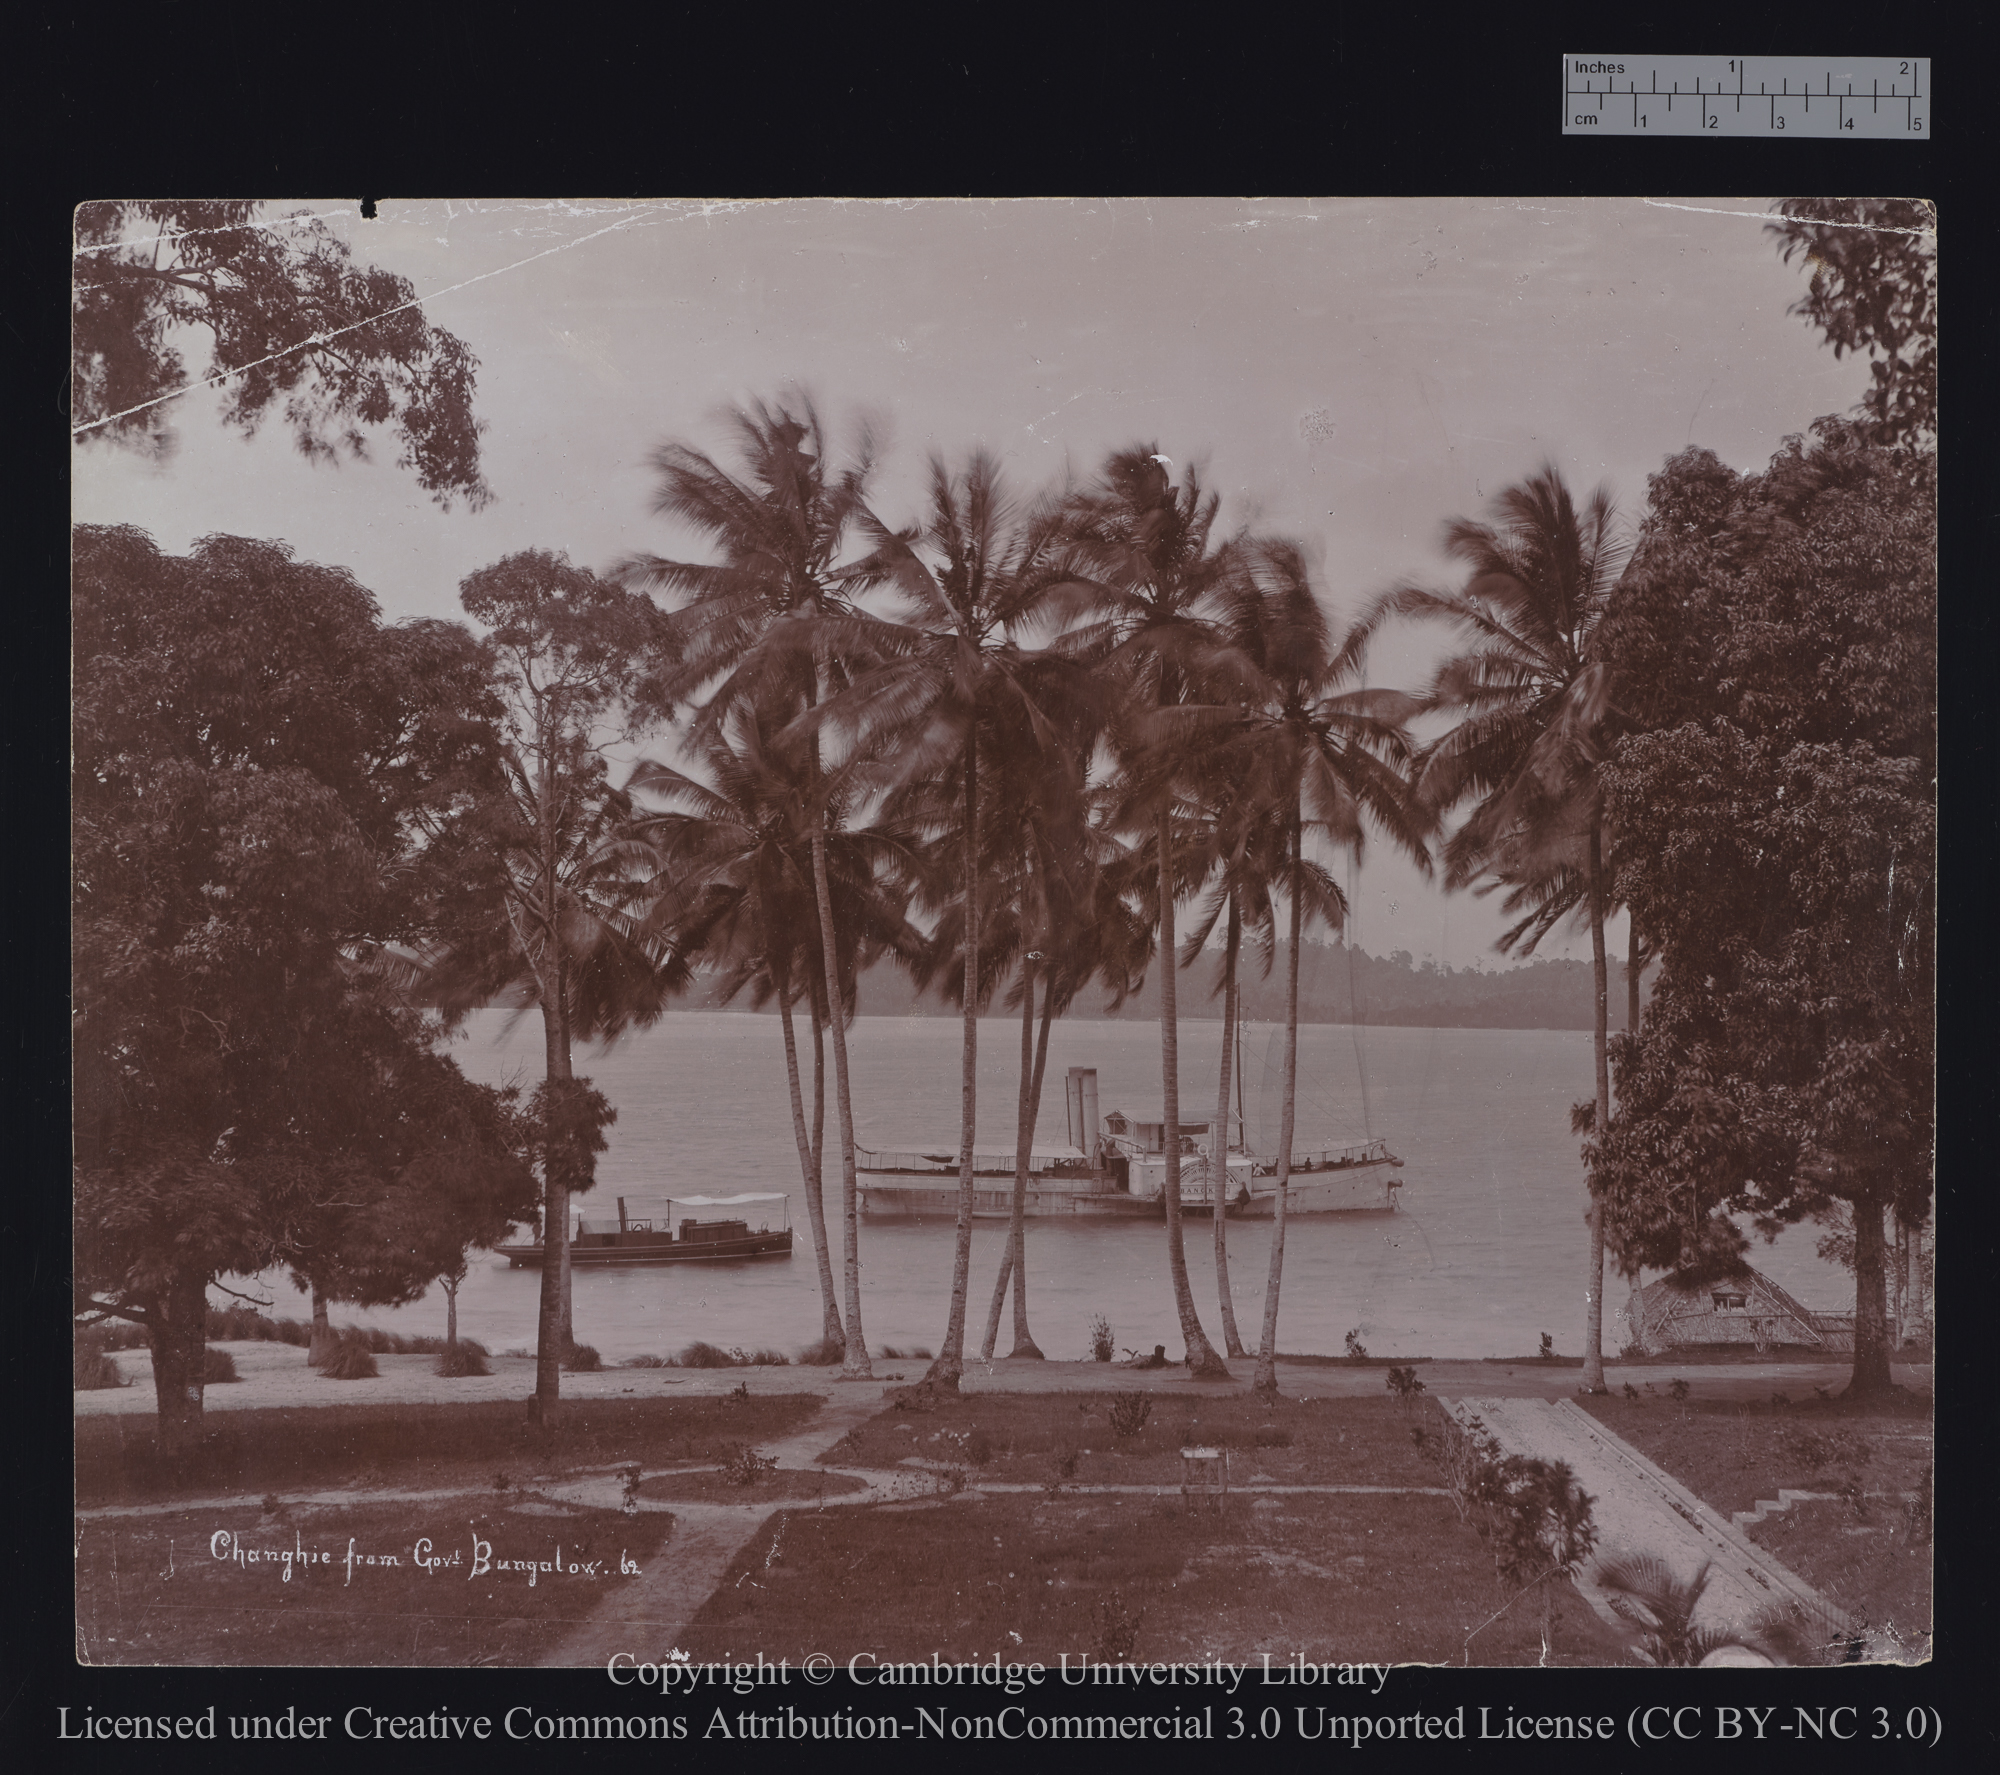 Changhie from Govt. [i.e. Government] Bungalow, 1900